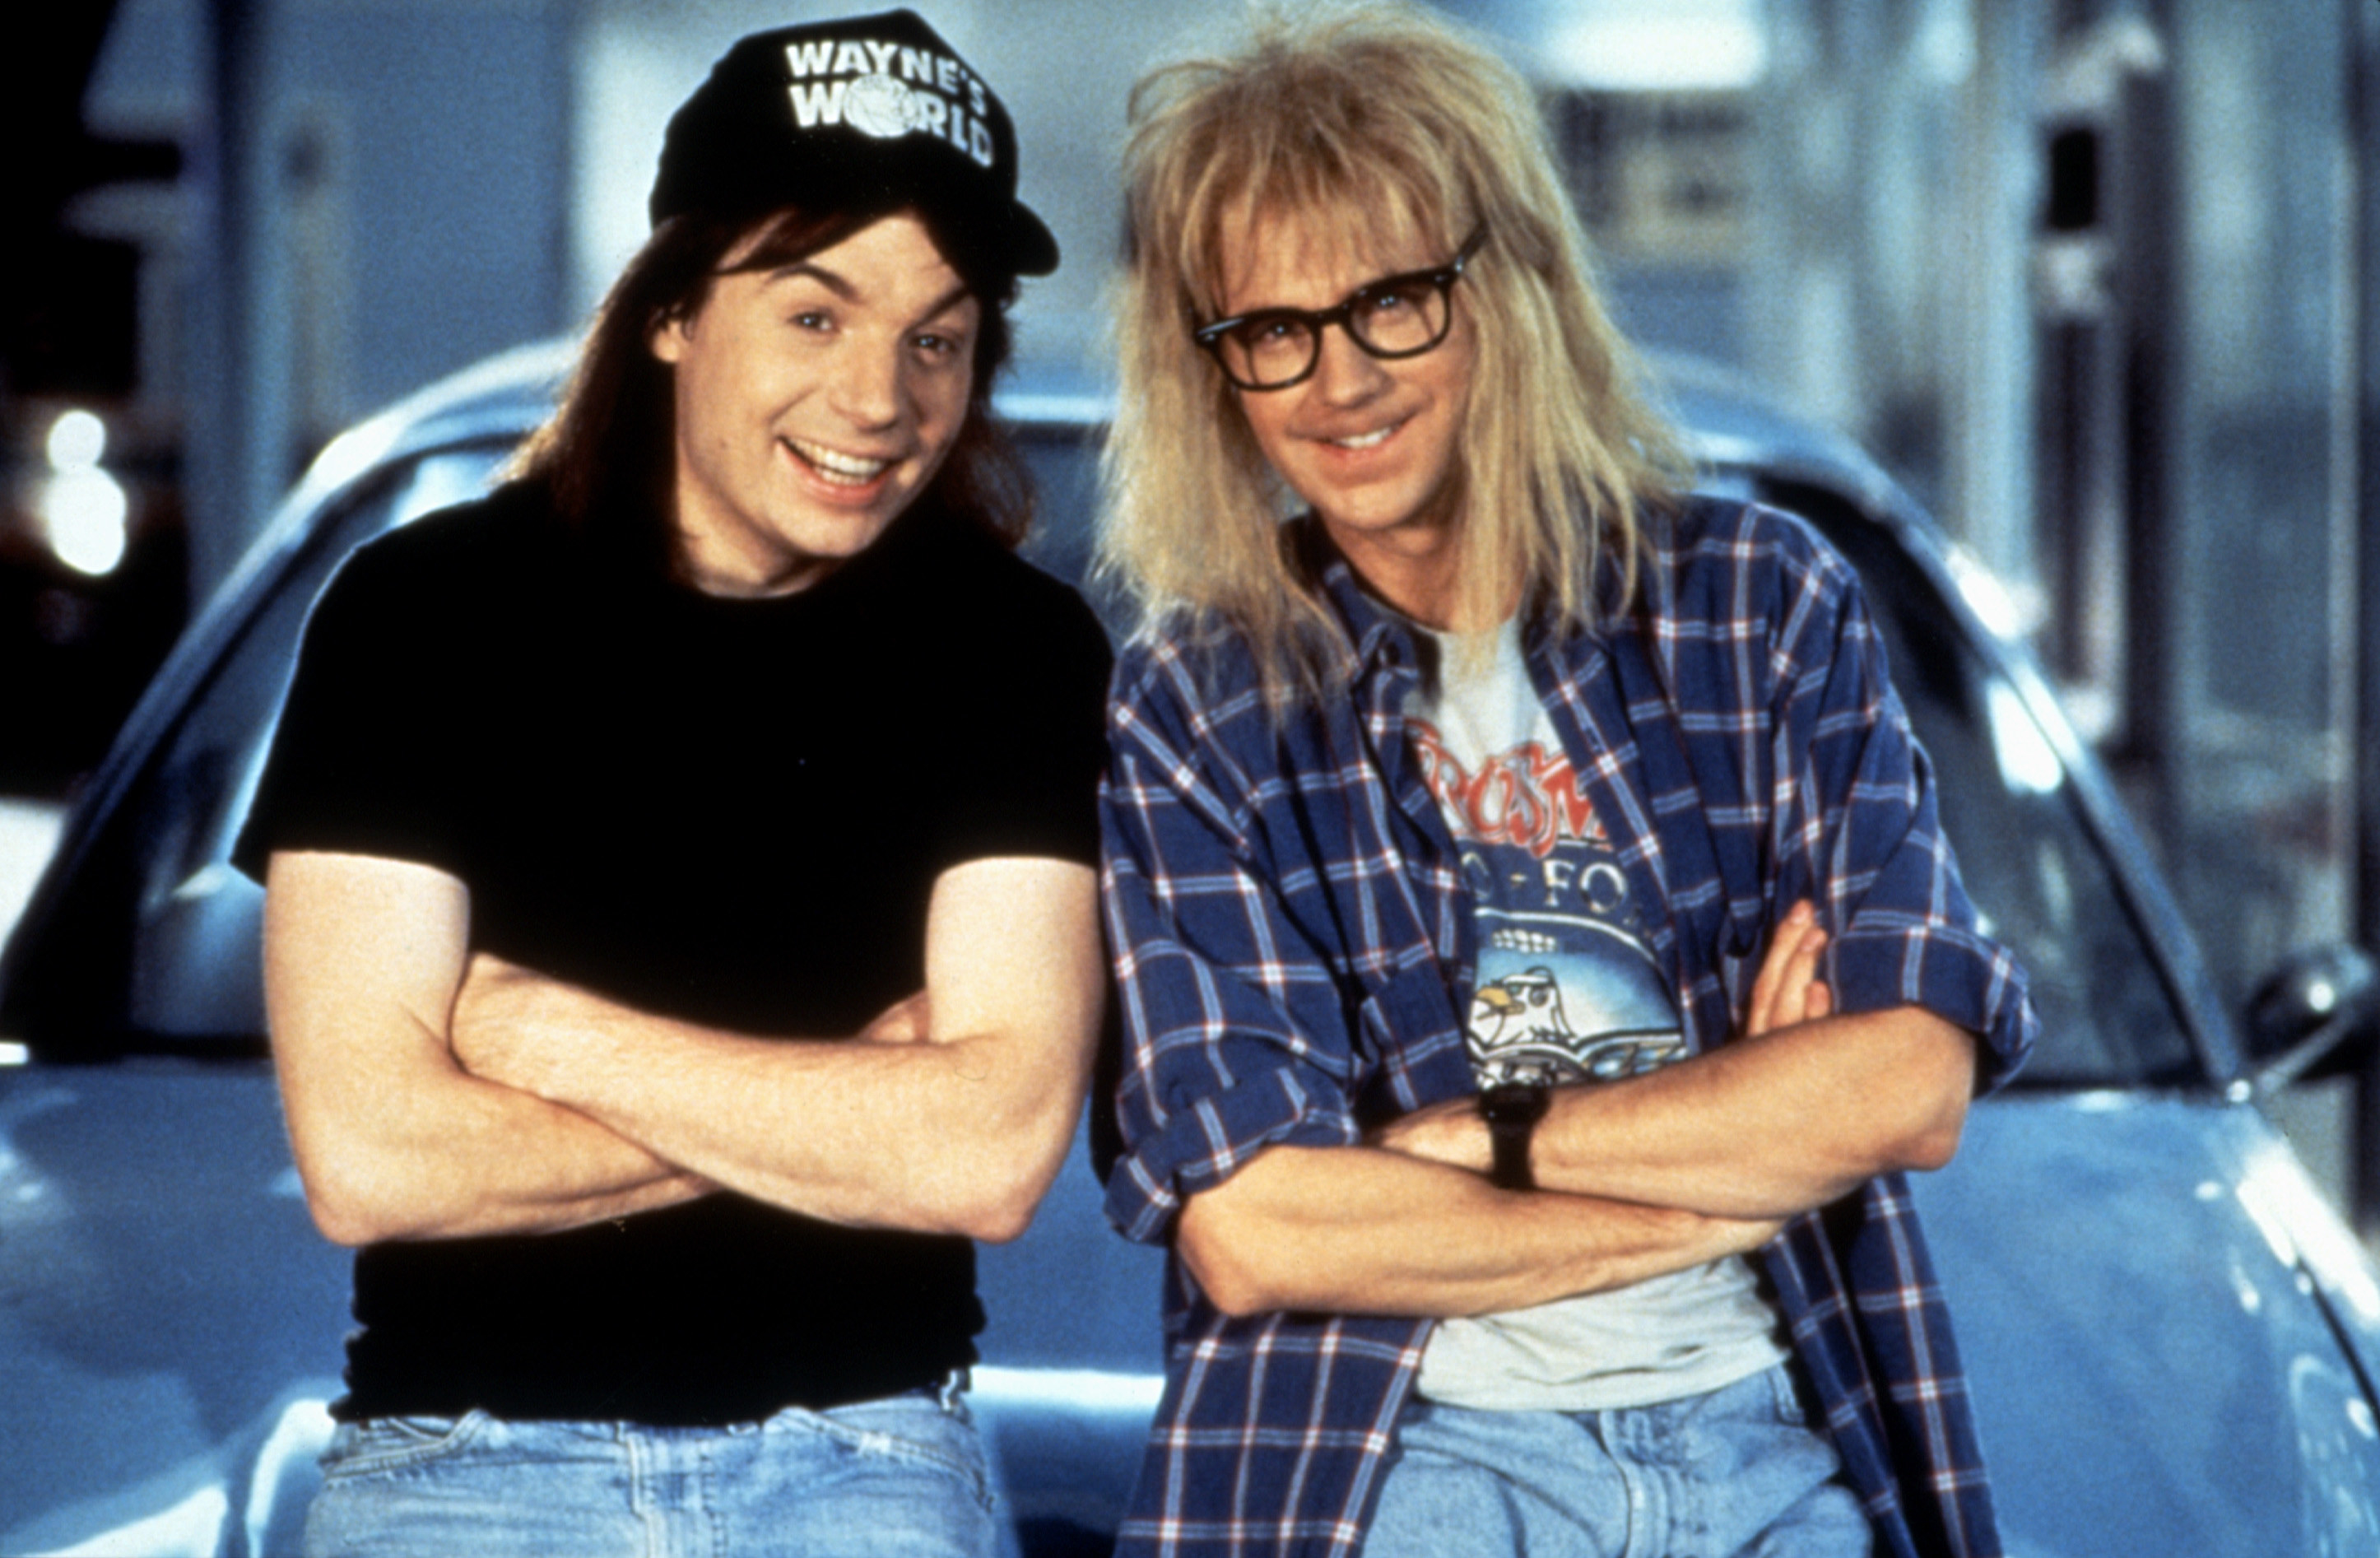 Wayne and Garth leaning against a car and smiling